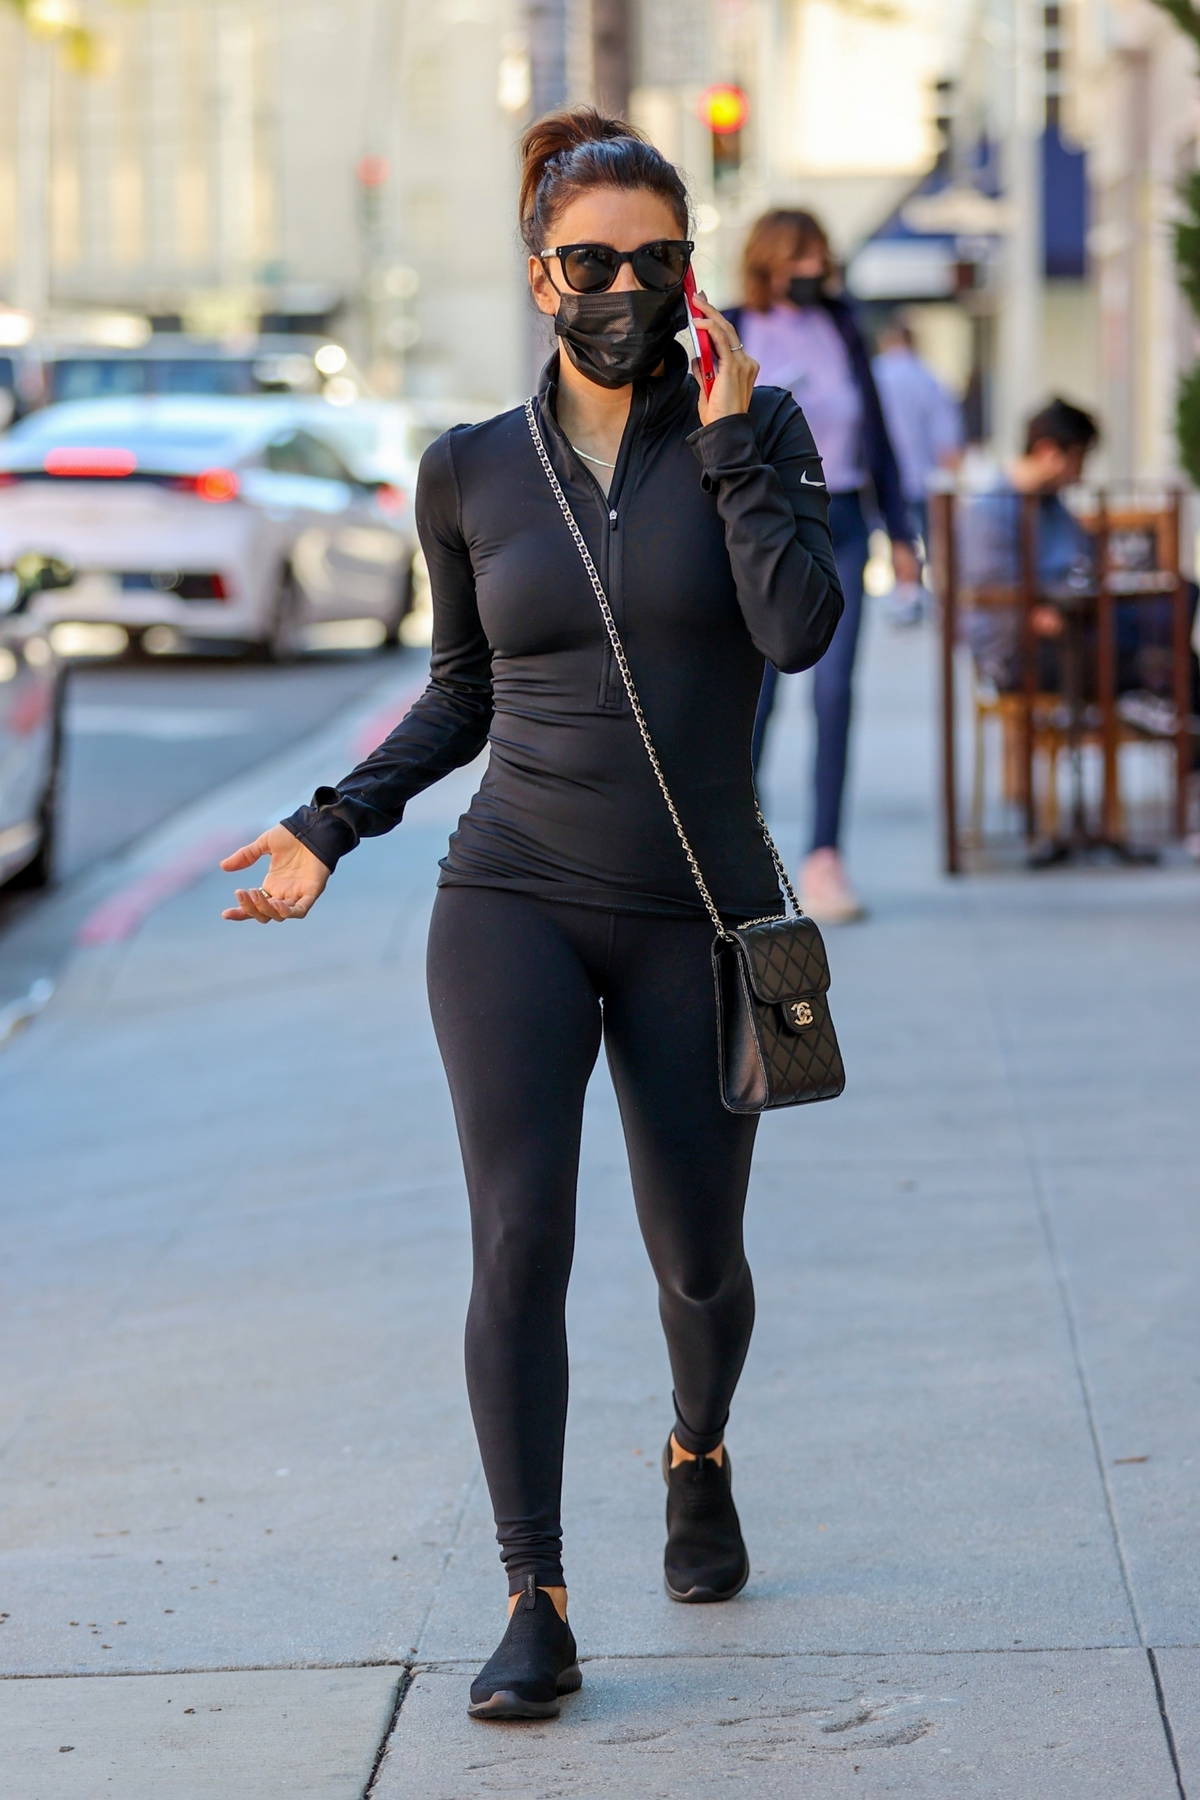 https://www.celebsfirst.com/wp-content/uploads/2022/01/eva-longoria-sports-a-form-fitting-black-top-with-leggings-while-out-running-errands-in-beverly-hills-california-200122_5.jpg